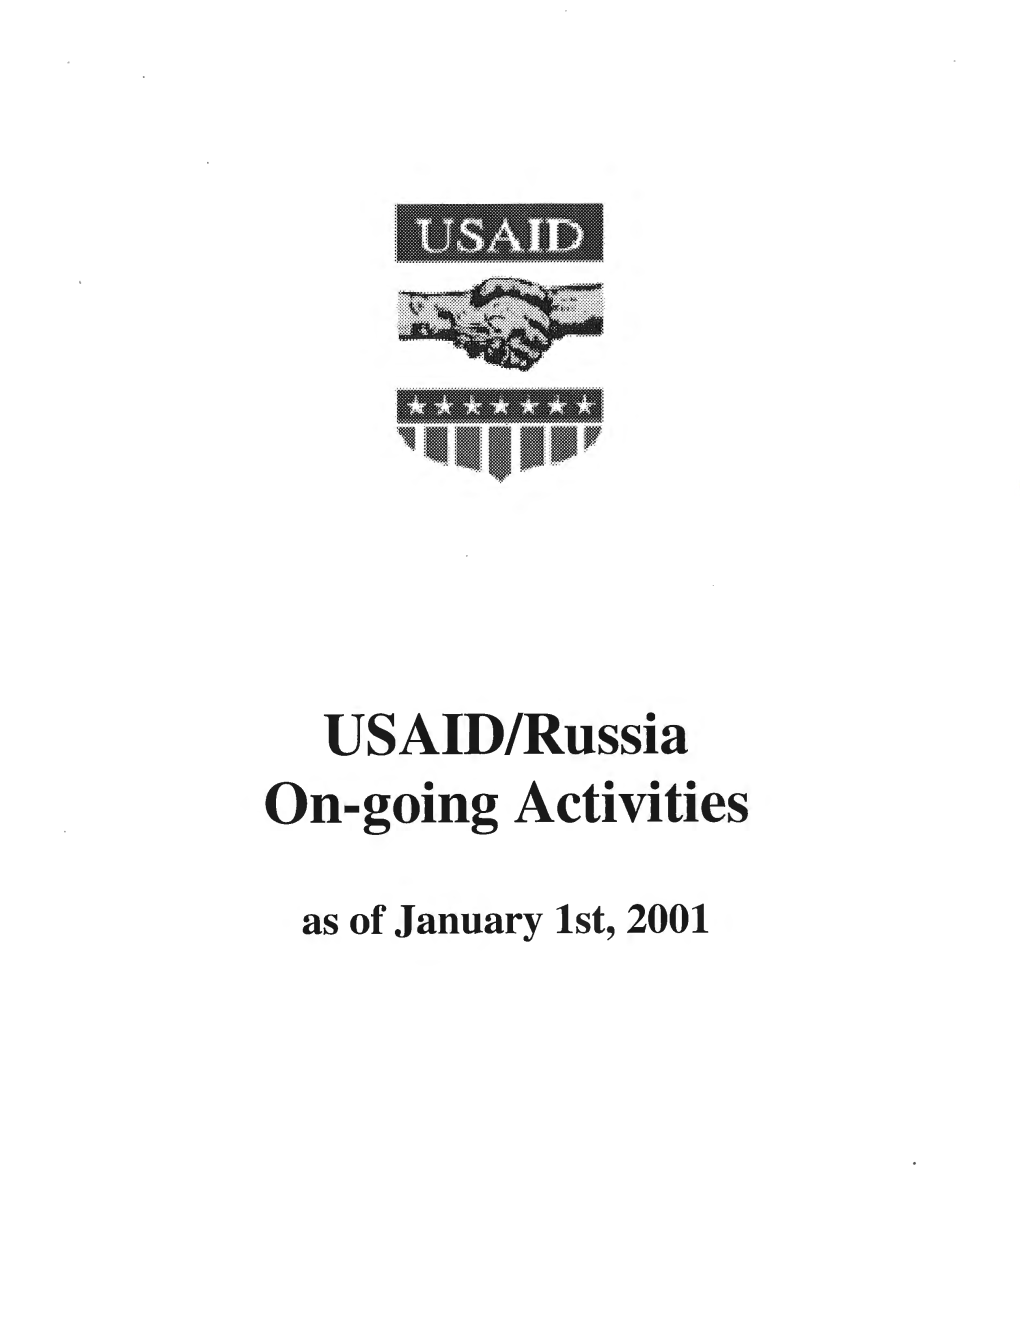 US AID/Russia On-Going Activities